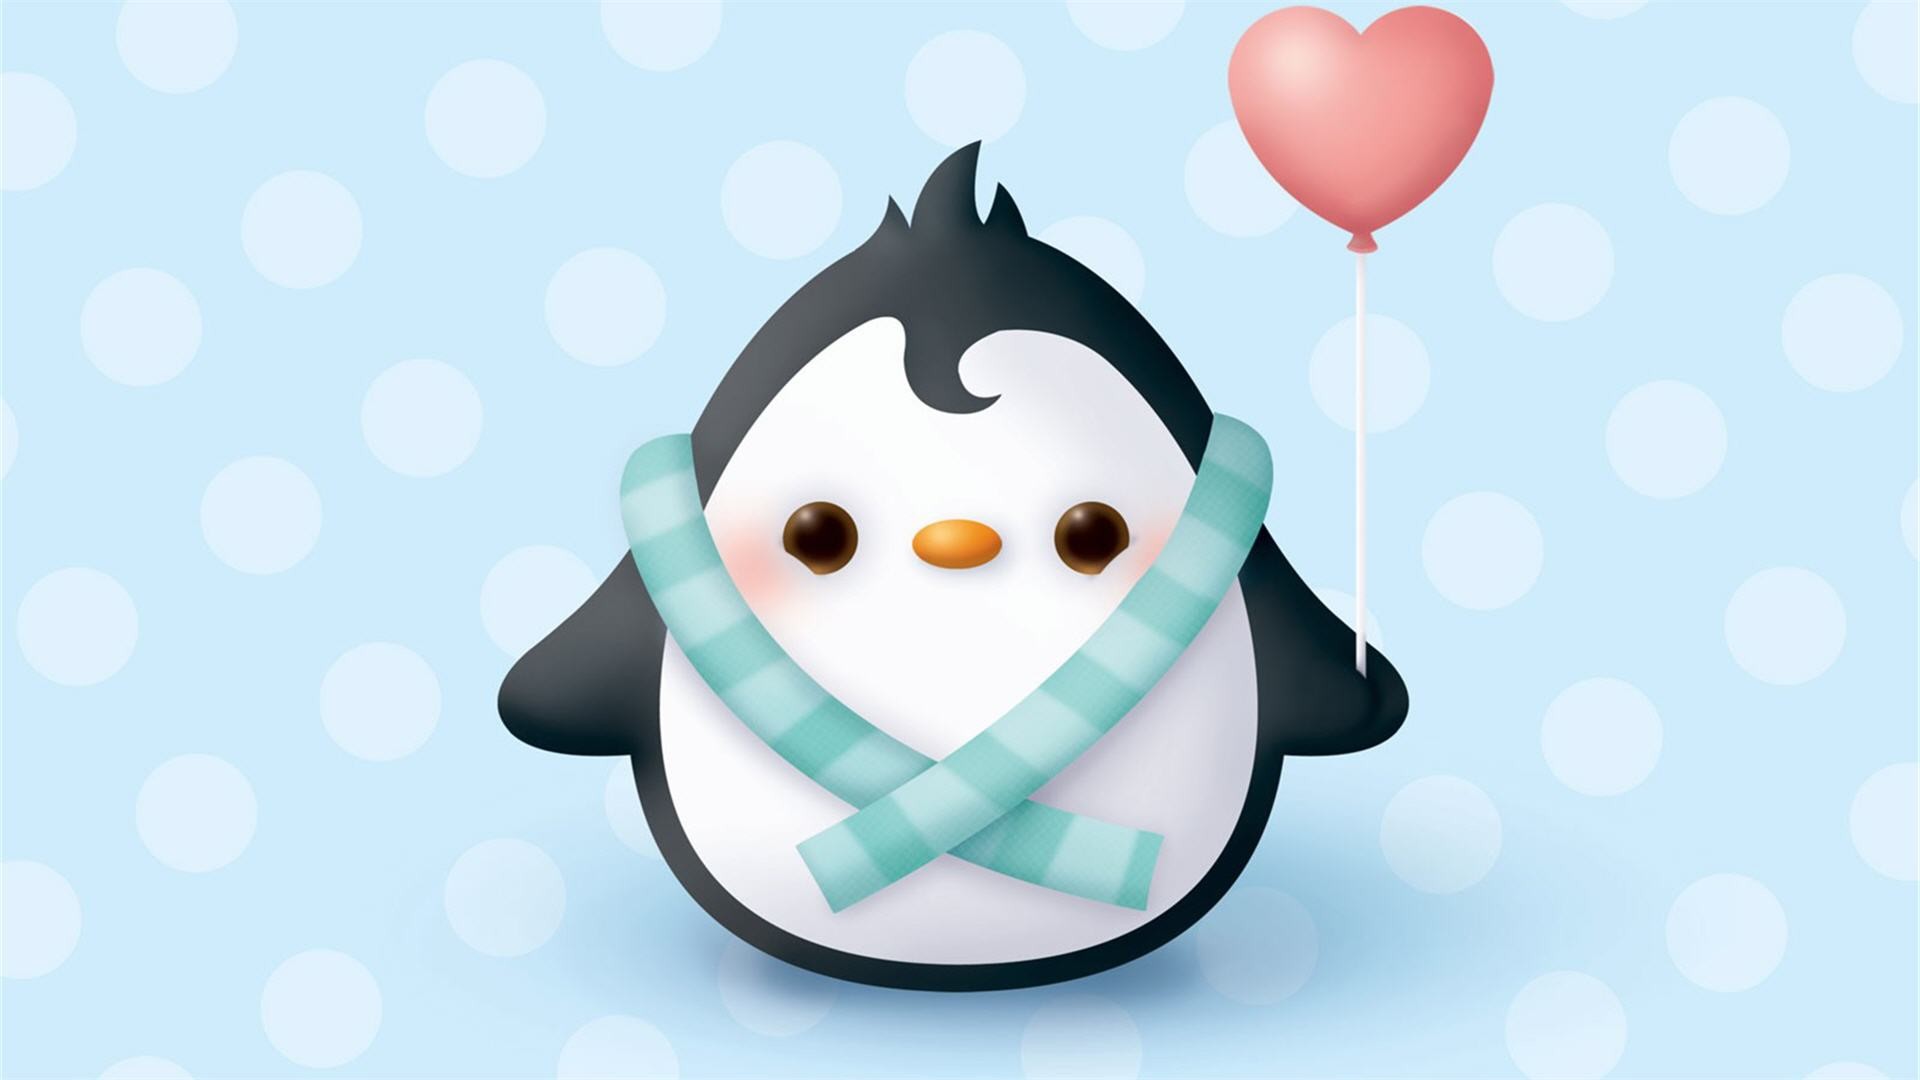 1920x1080 Cute Animated Penguins Wallpaper - ClipArt Best